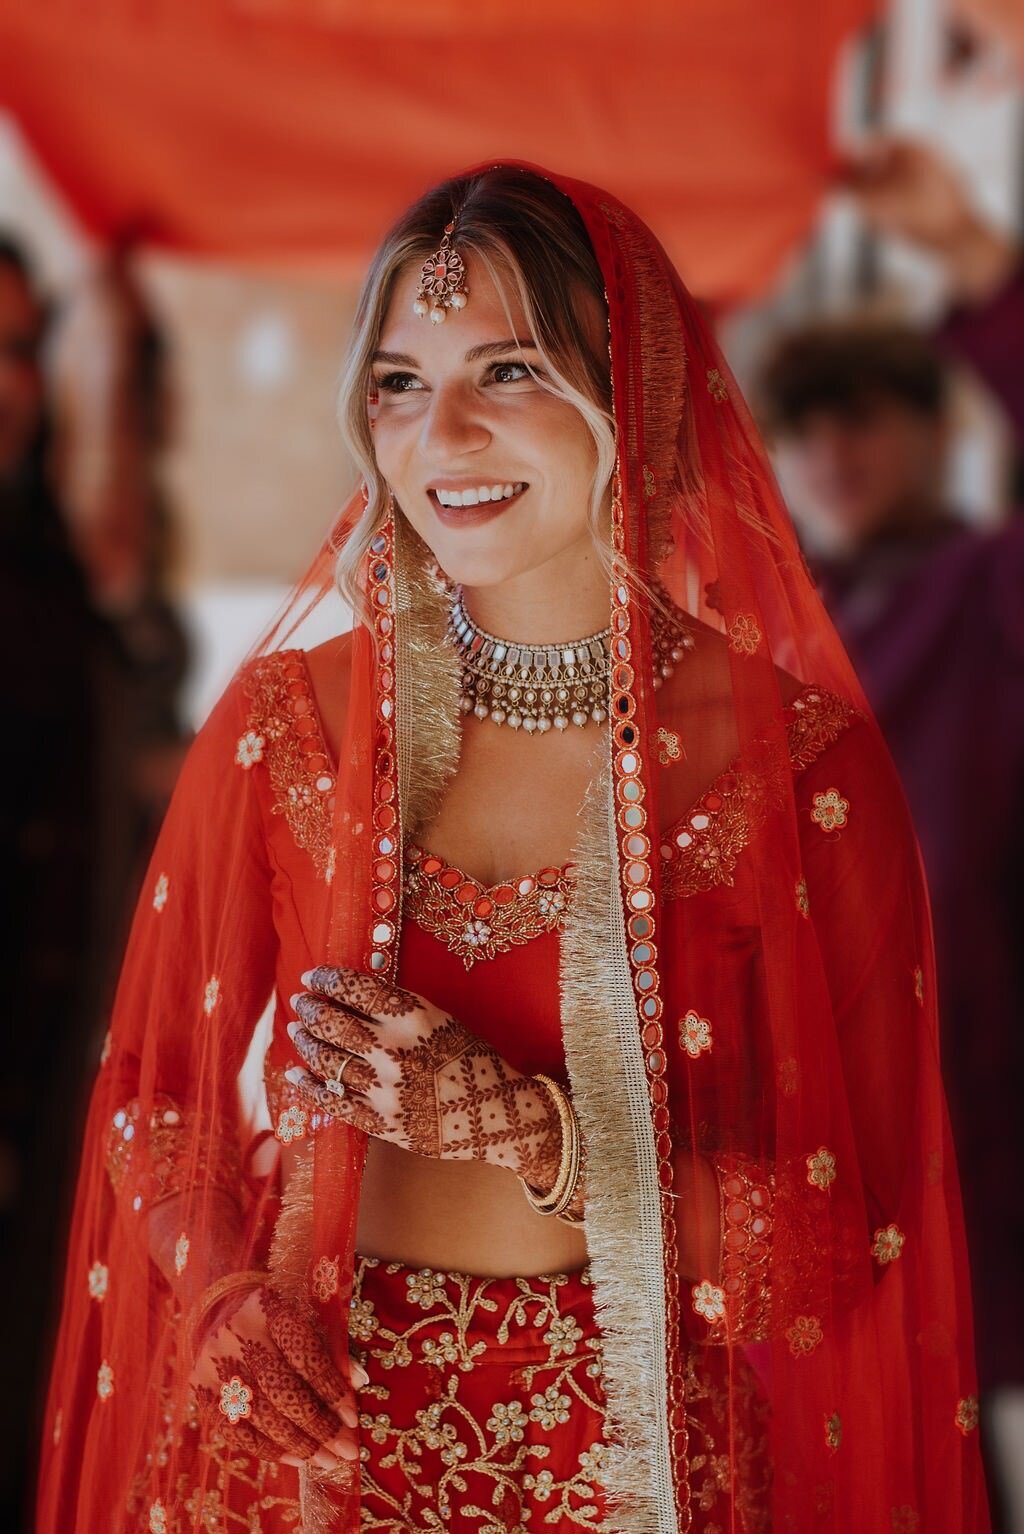 A woman wearing a sari smiles  on her wedding day